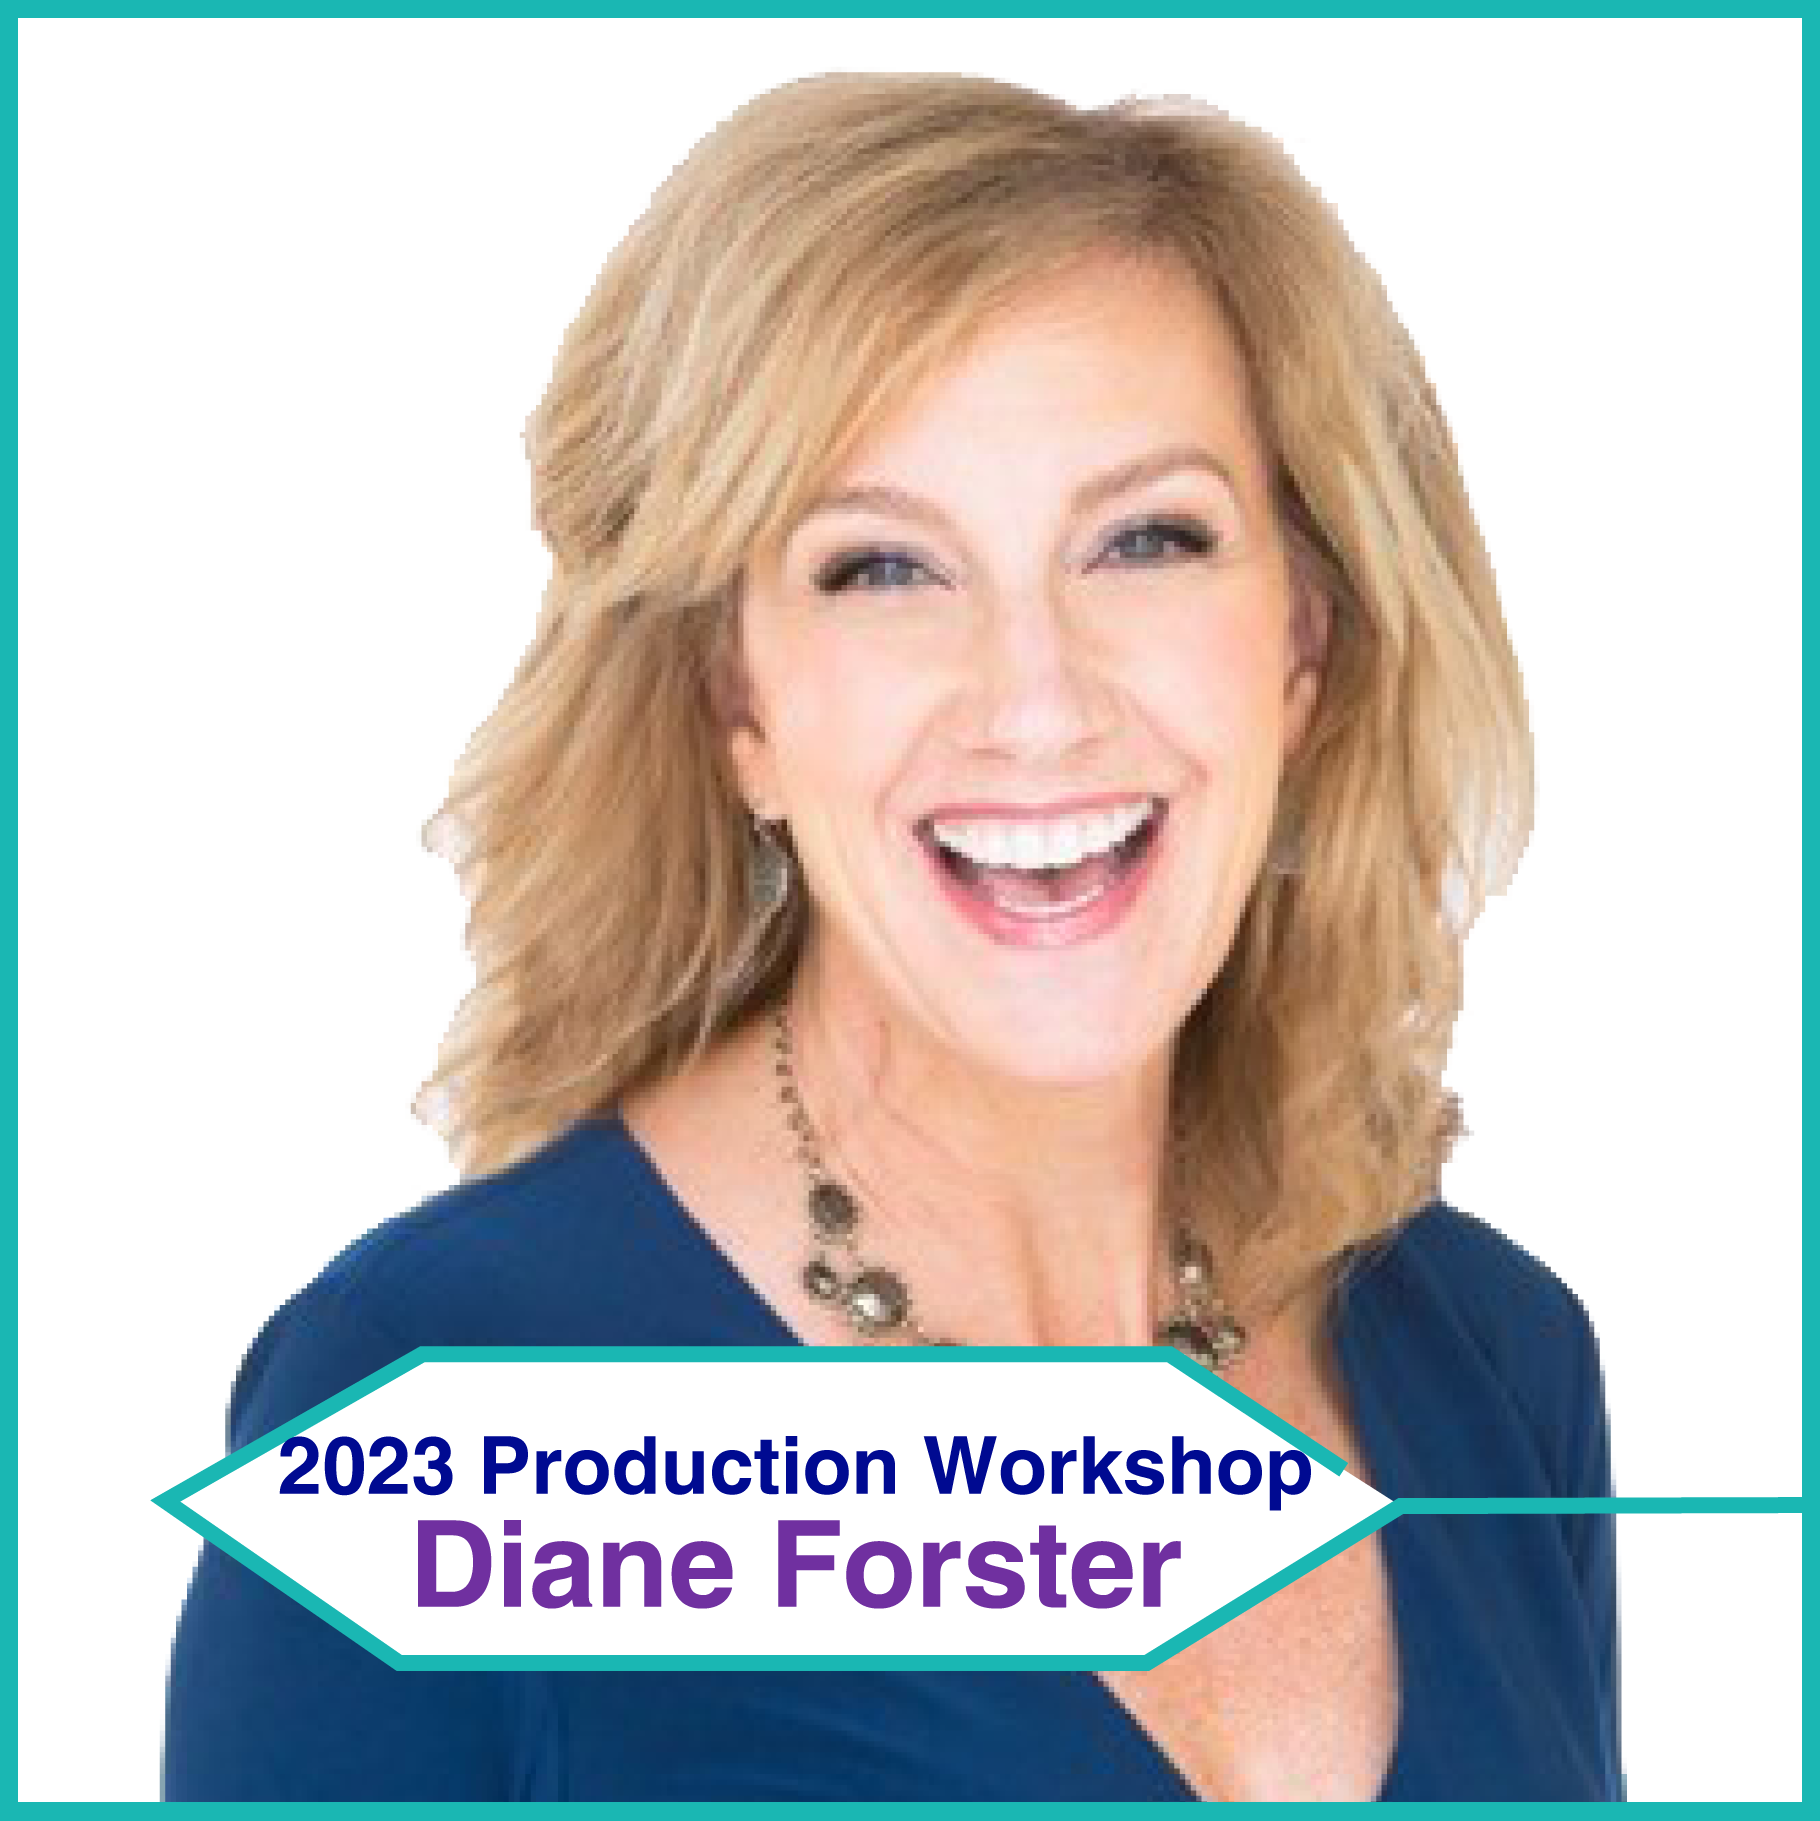 https://digifesttemecula.org/wp-content/uploads/2023/02/Diane_forster.png